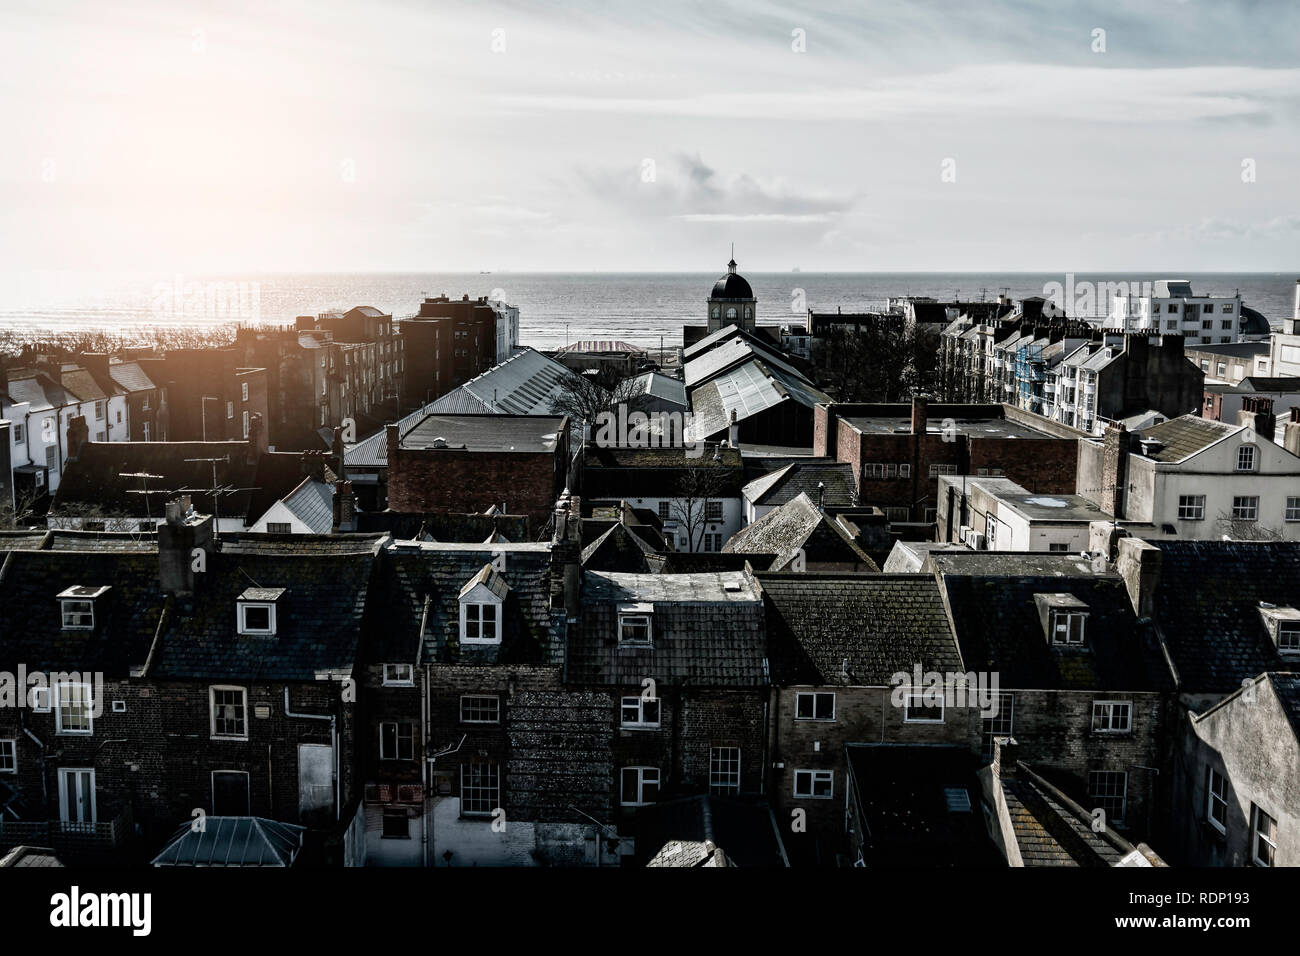 View looking over rooftops towards the sea in Worthing, West Sussex Stock Photo